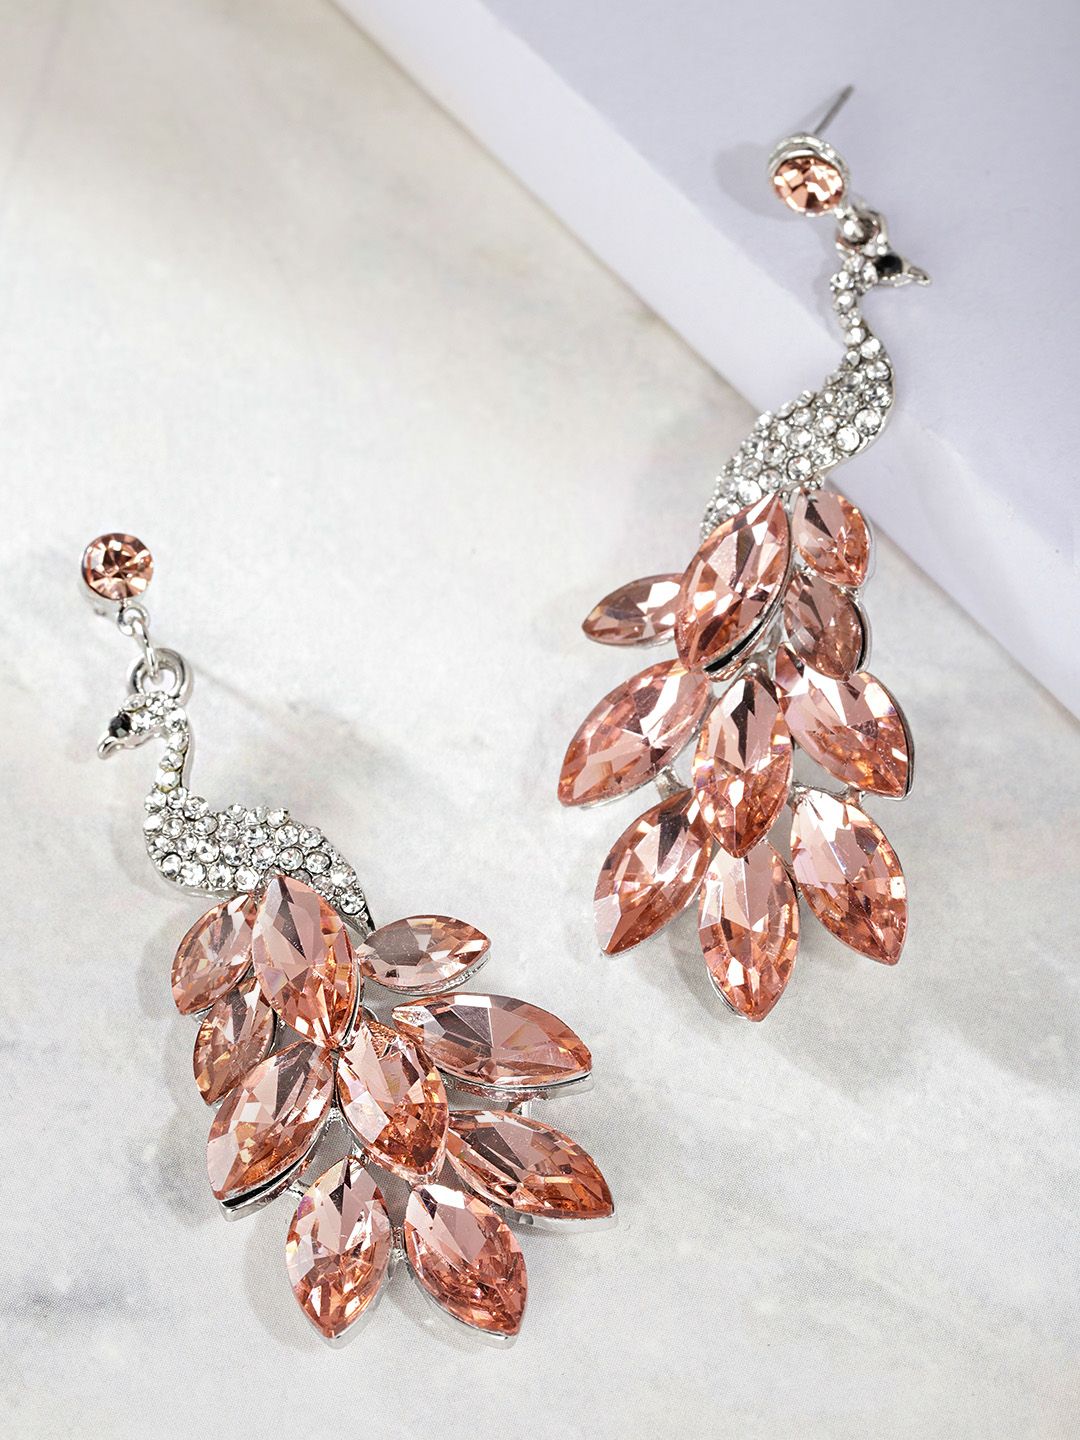 YouBella Peach-Coloured & Silver-Toned Stone-Studded Peacock-Shaped Drop Earrings Price in India